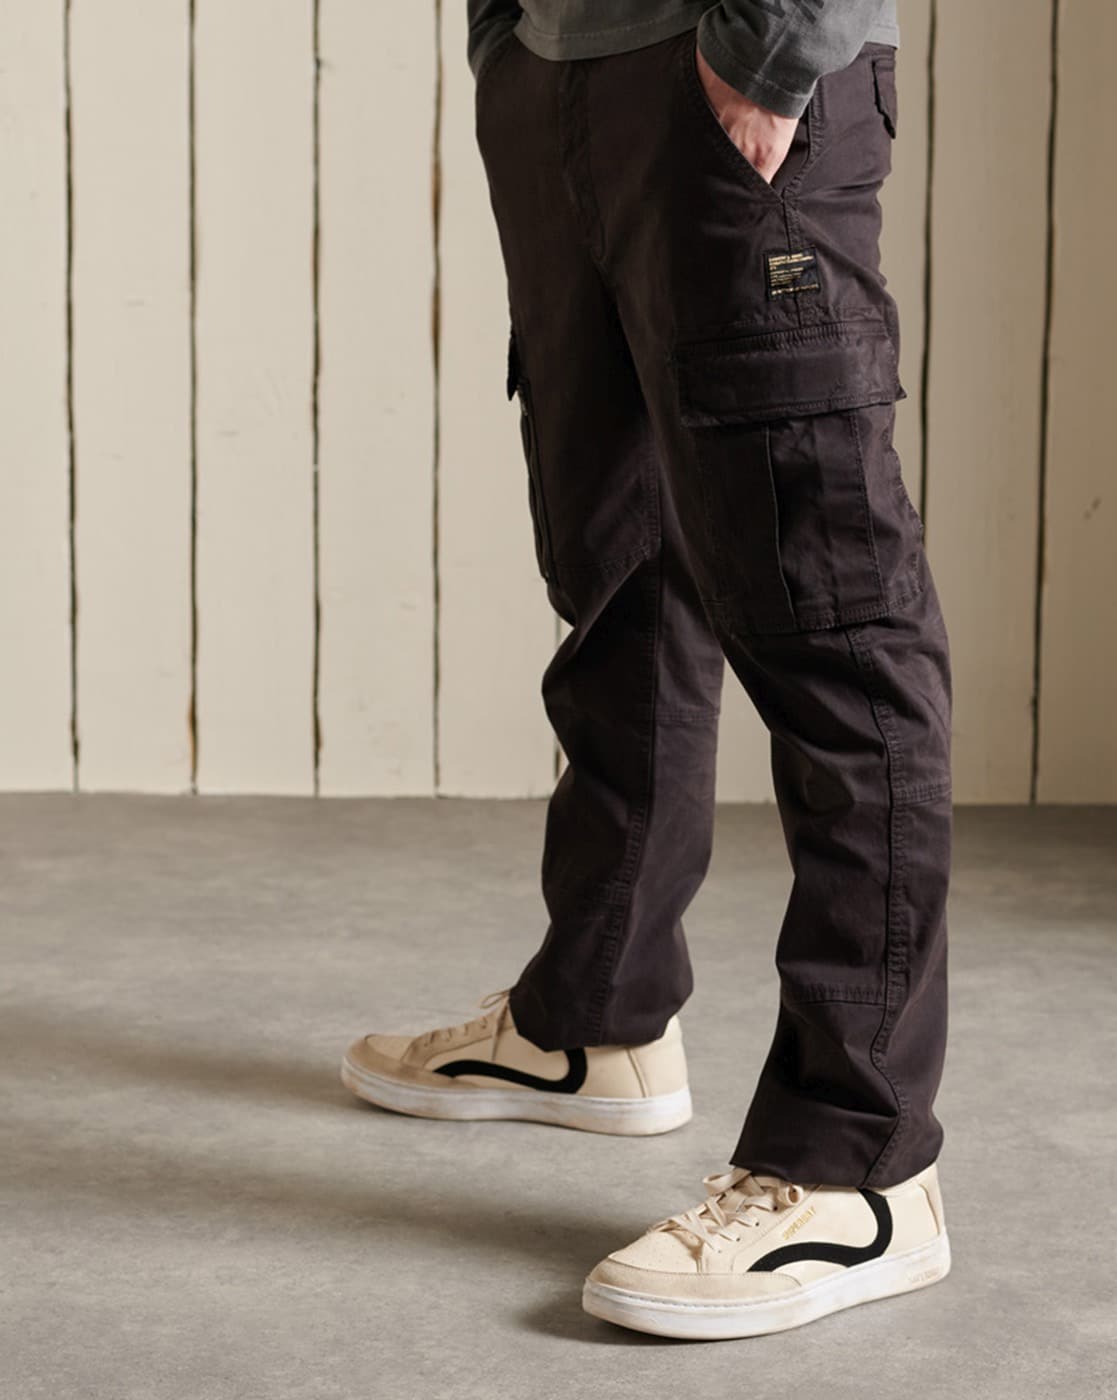 Buy Olive Trousers & Pants for Men by Bene Kleed Online | Ajio.com